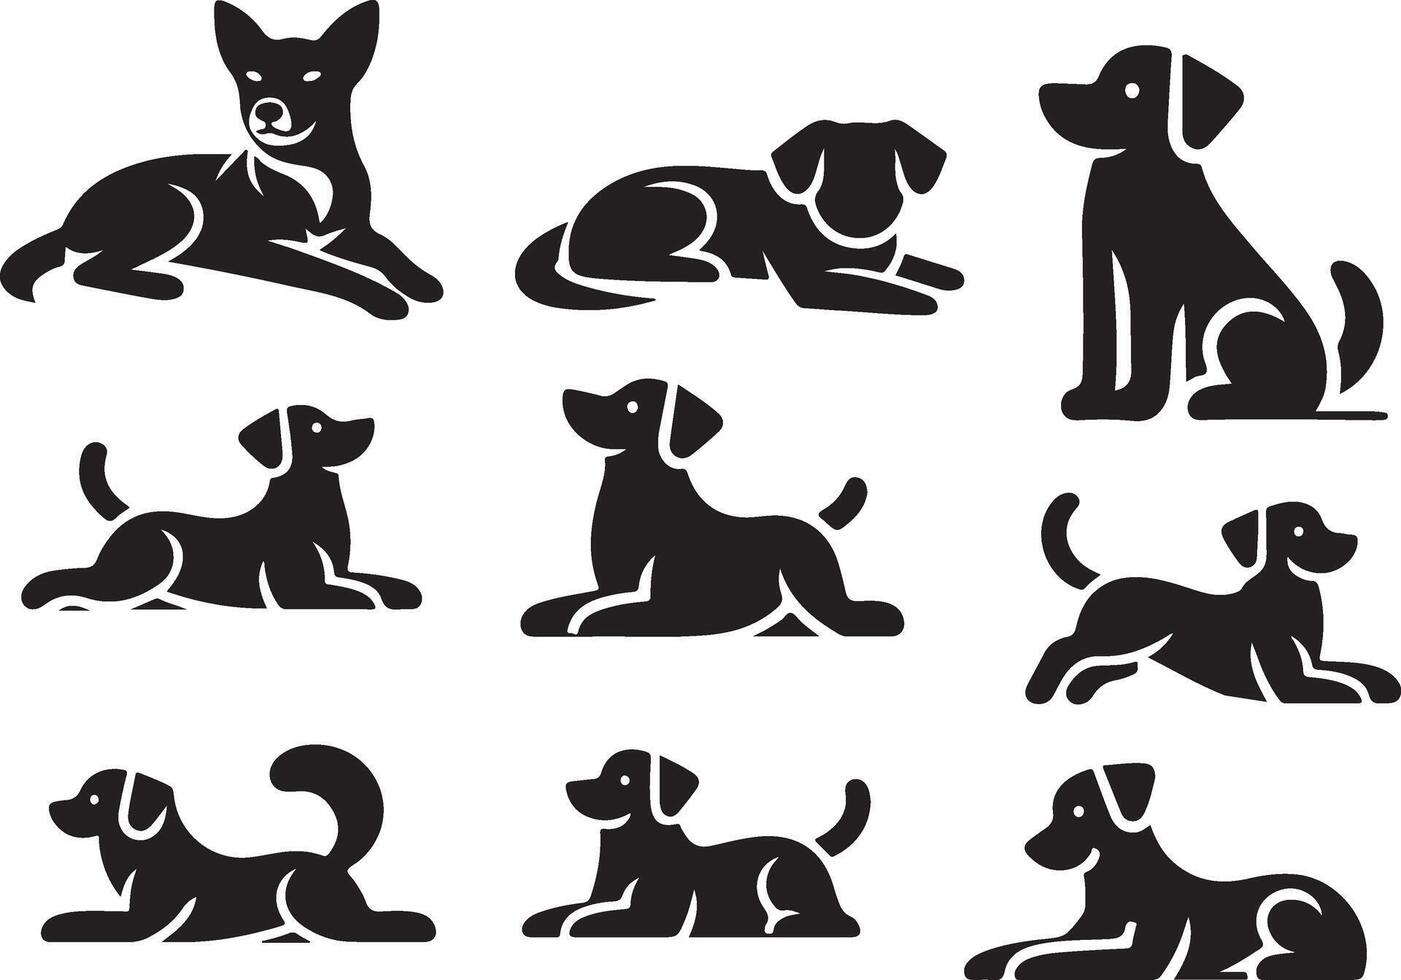 minimal Set of a Dog lay down different pose vector icon in flat style black color silhouette, separated each element, white background 2